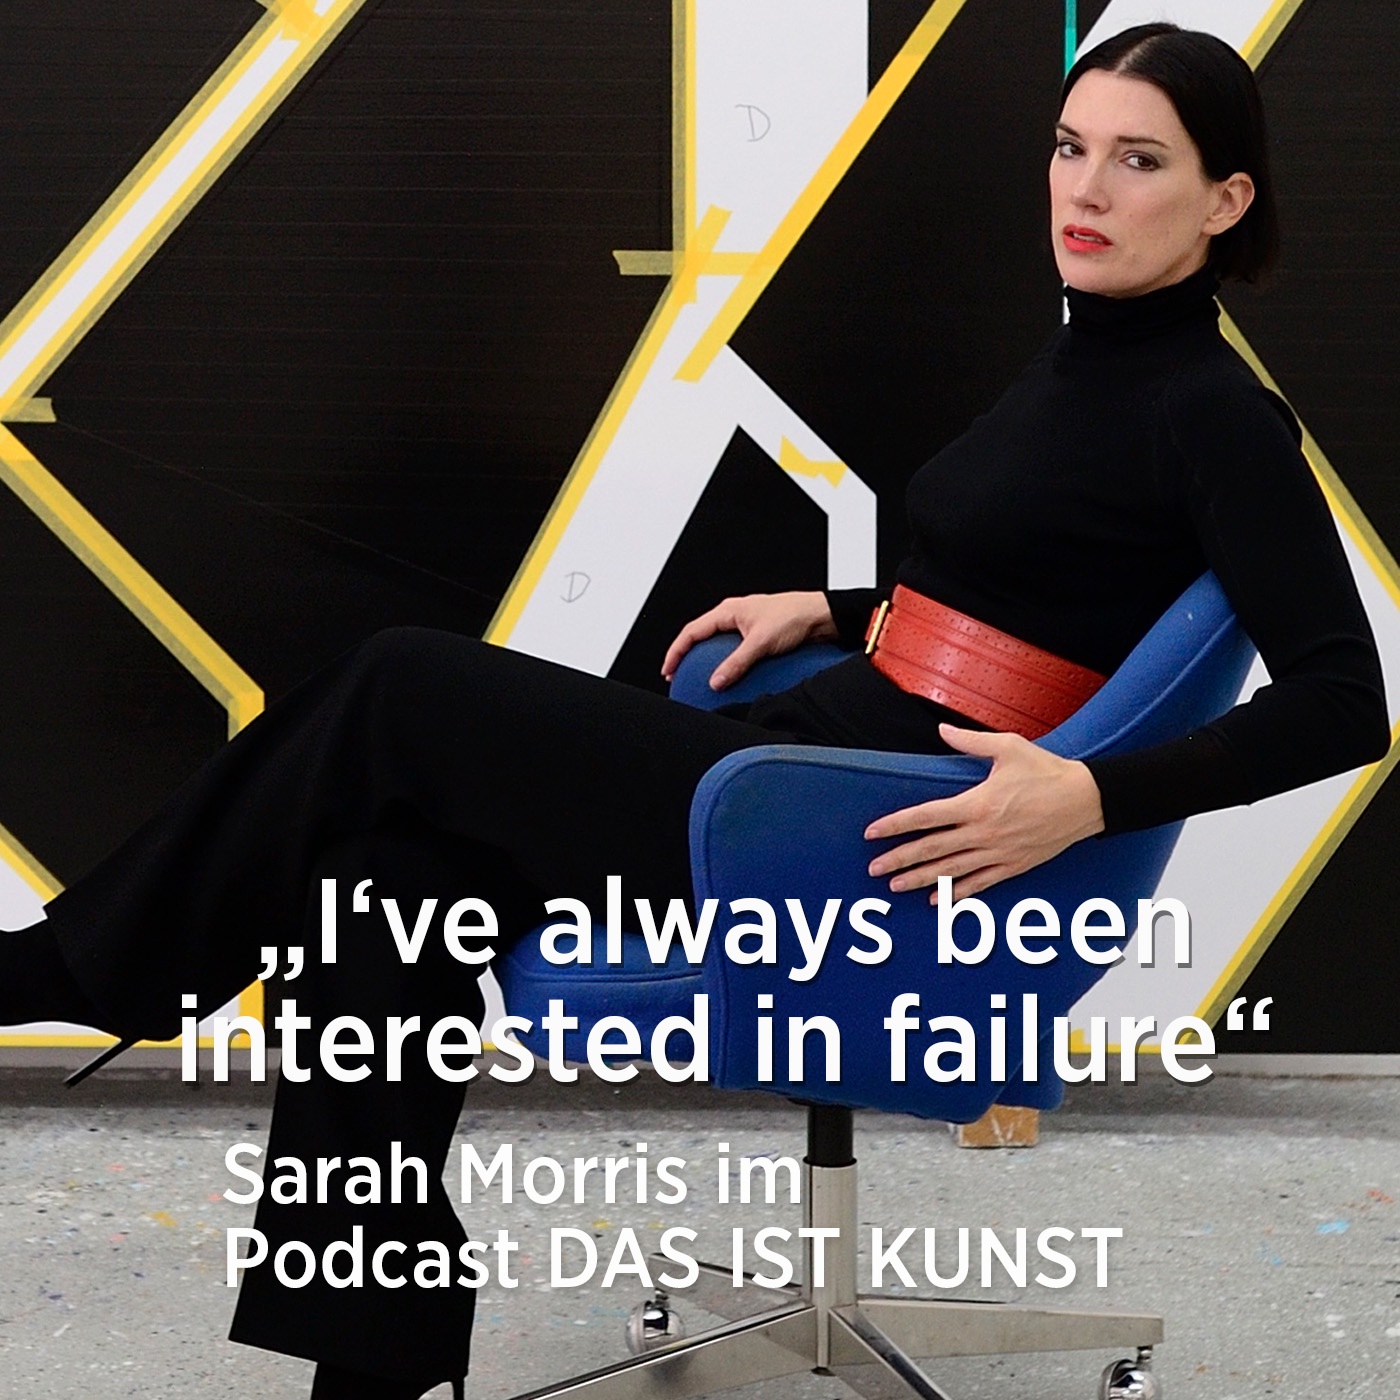 „I’ve always been interested in failure“ – Sarah Morris